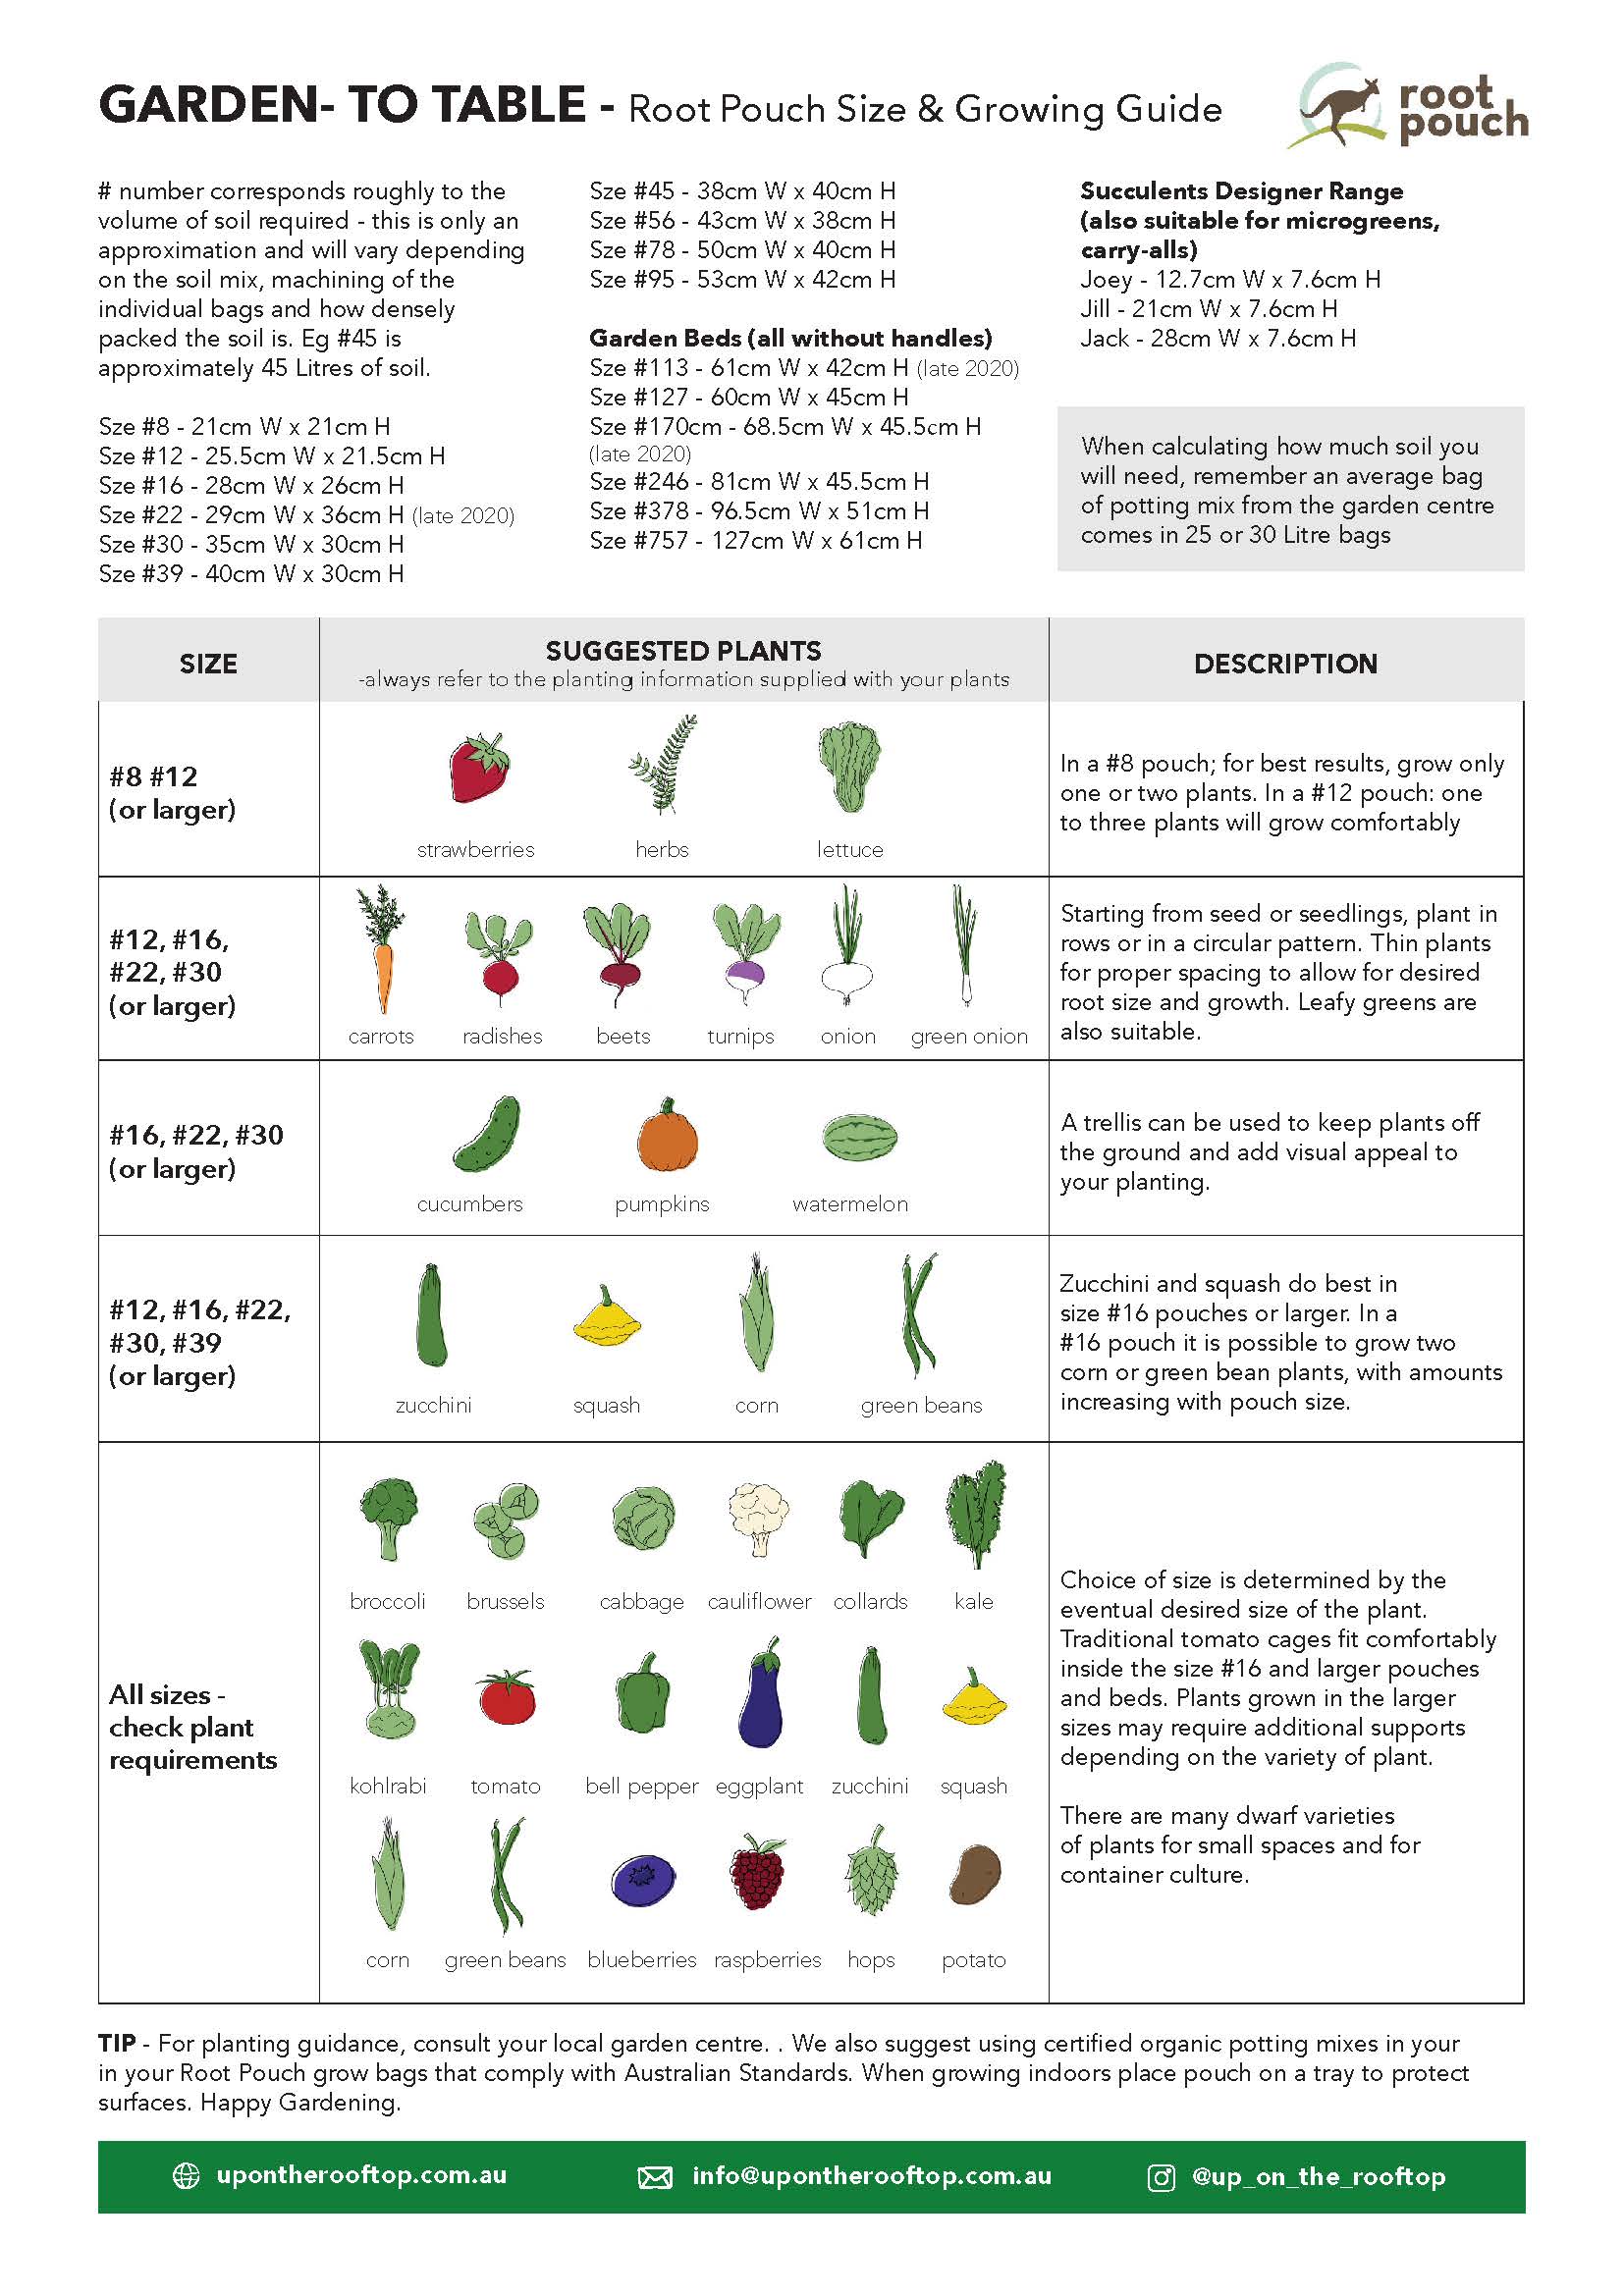 Optimal Grow Bag Sizes for Vegetables, Herbs, and Fruits